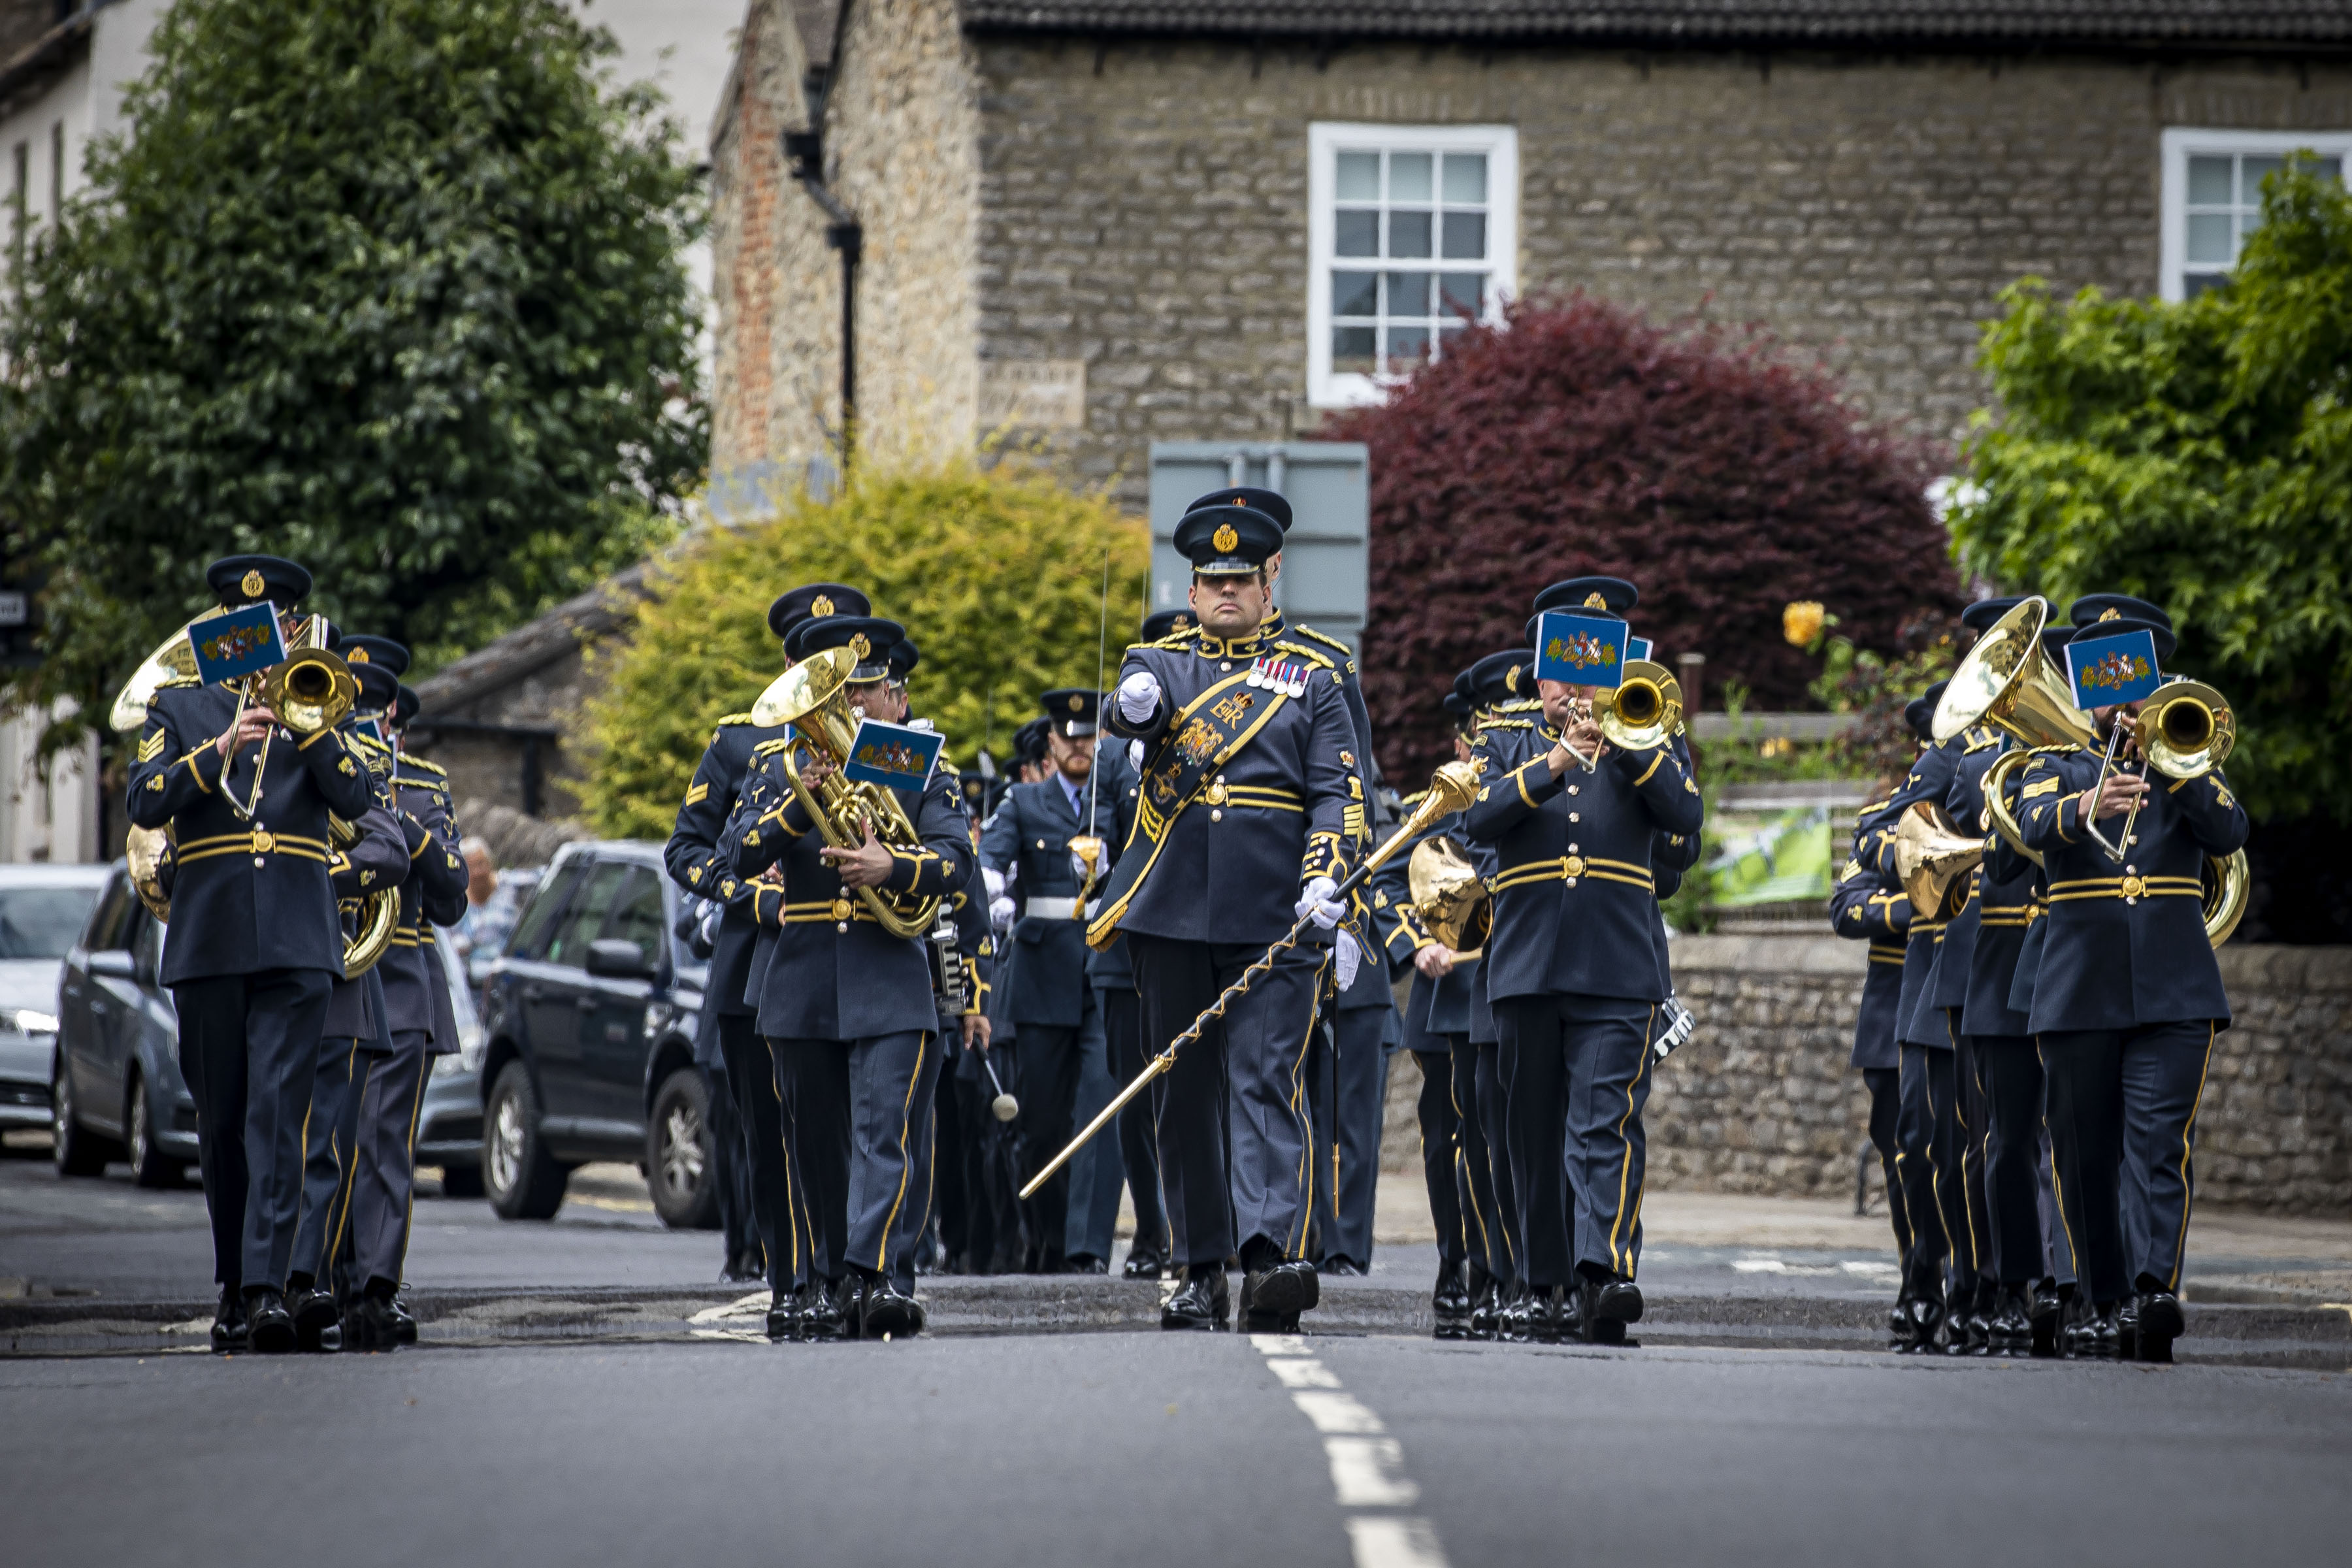 The RAF Central band